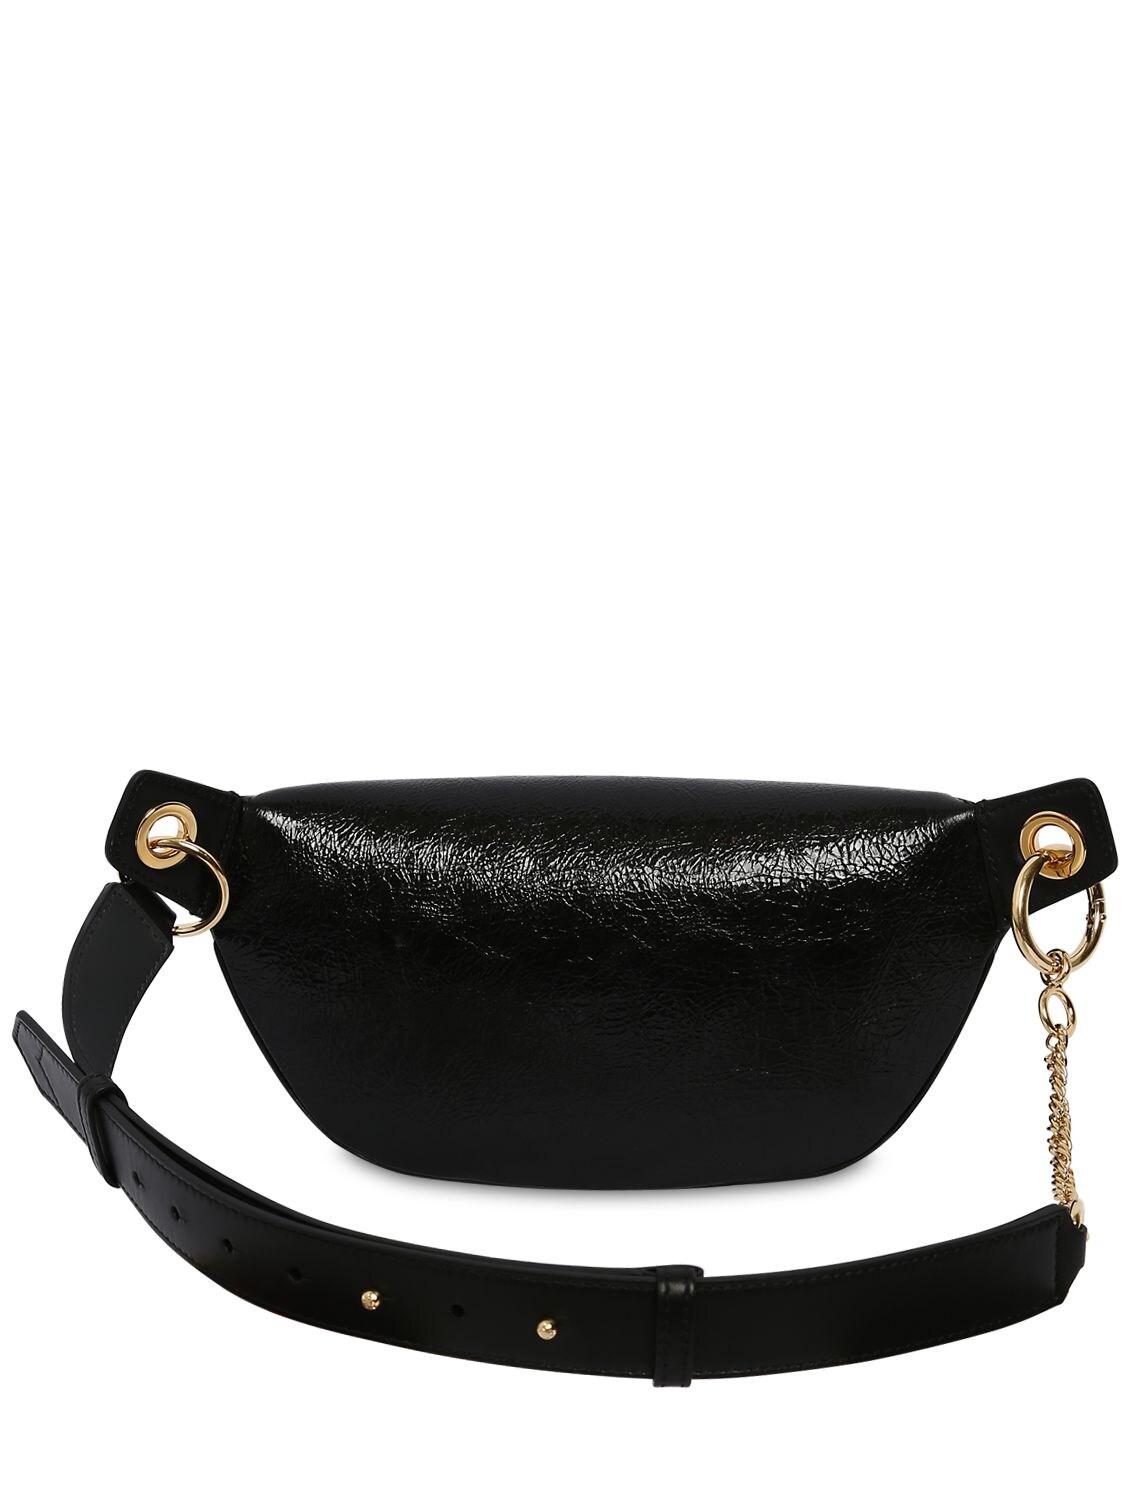 Givenchy Id Crackle Leather Belt Bag in Black | Lyst